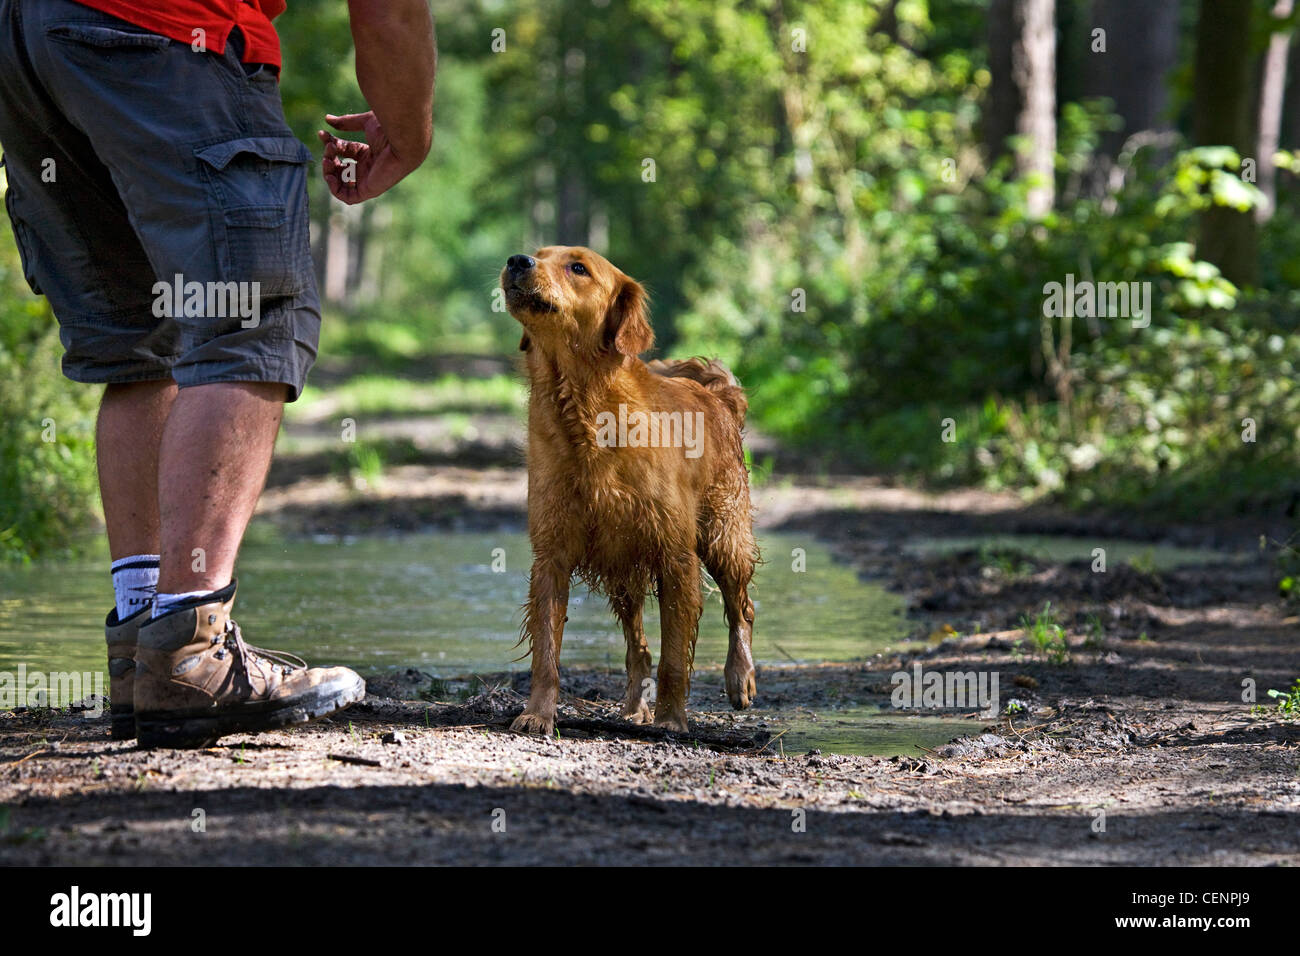 Golden retriever dog with wet fur and man going for a walk on muddy path with puddle in forest, Belgium Stock Photo